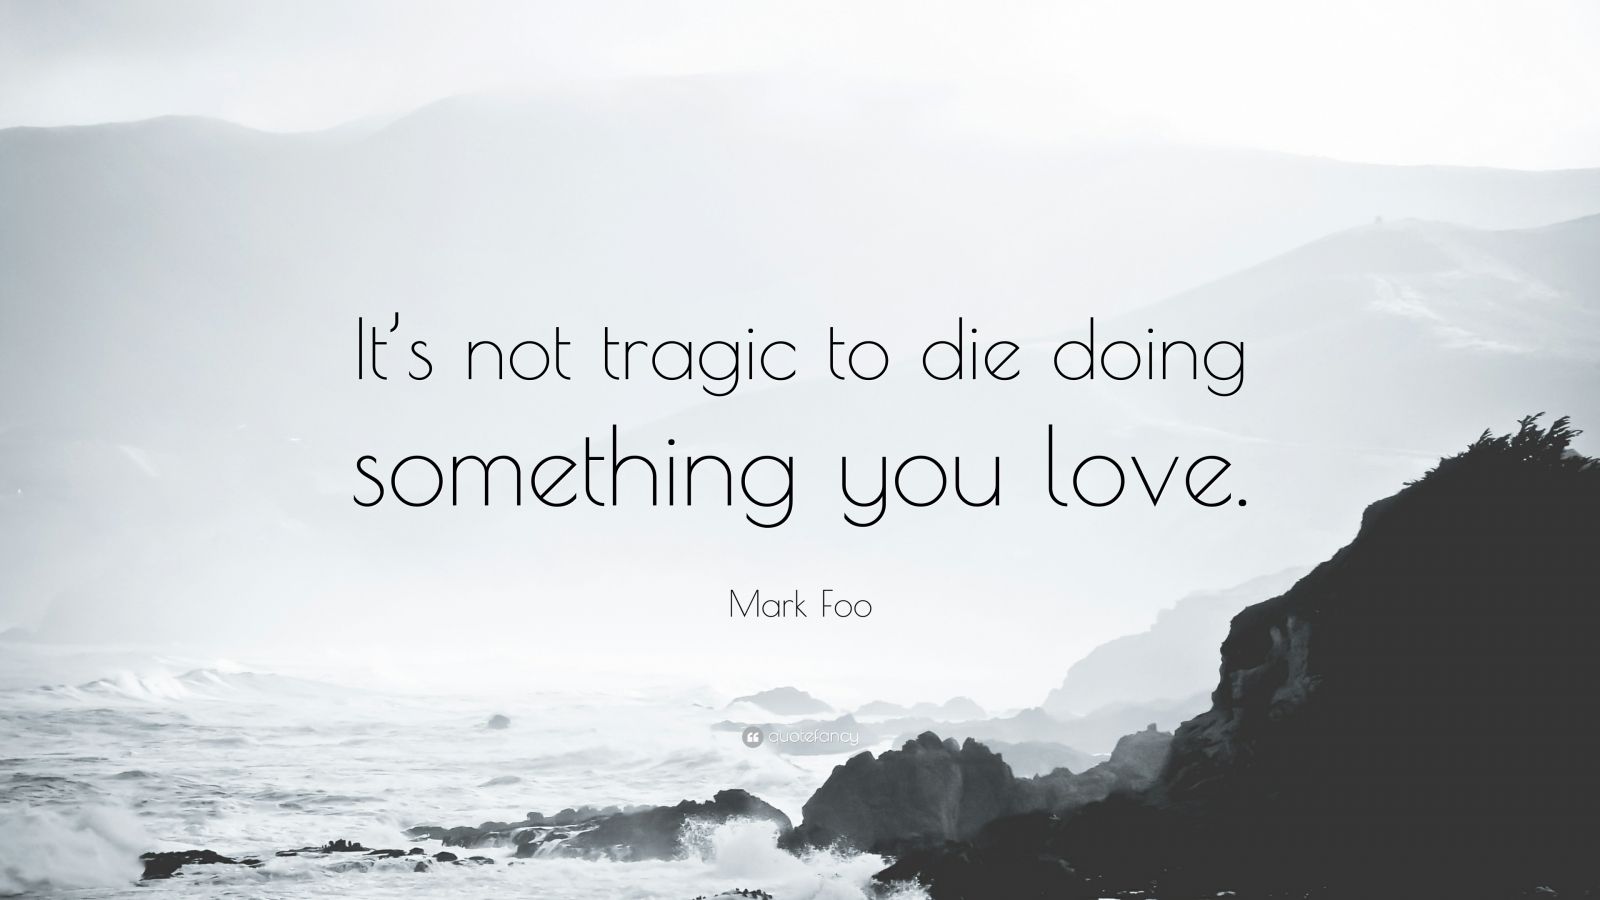 Mark Foo Quote: “It's not tragic to die doing something you love.”